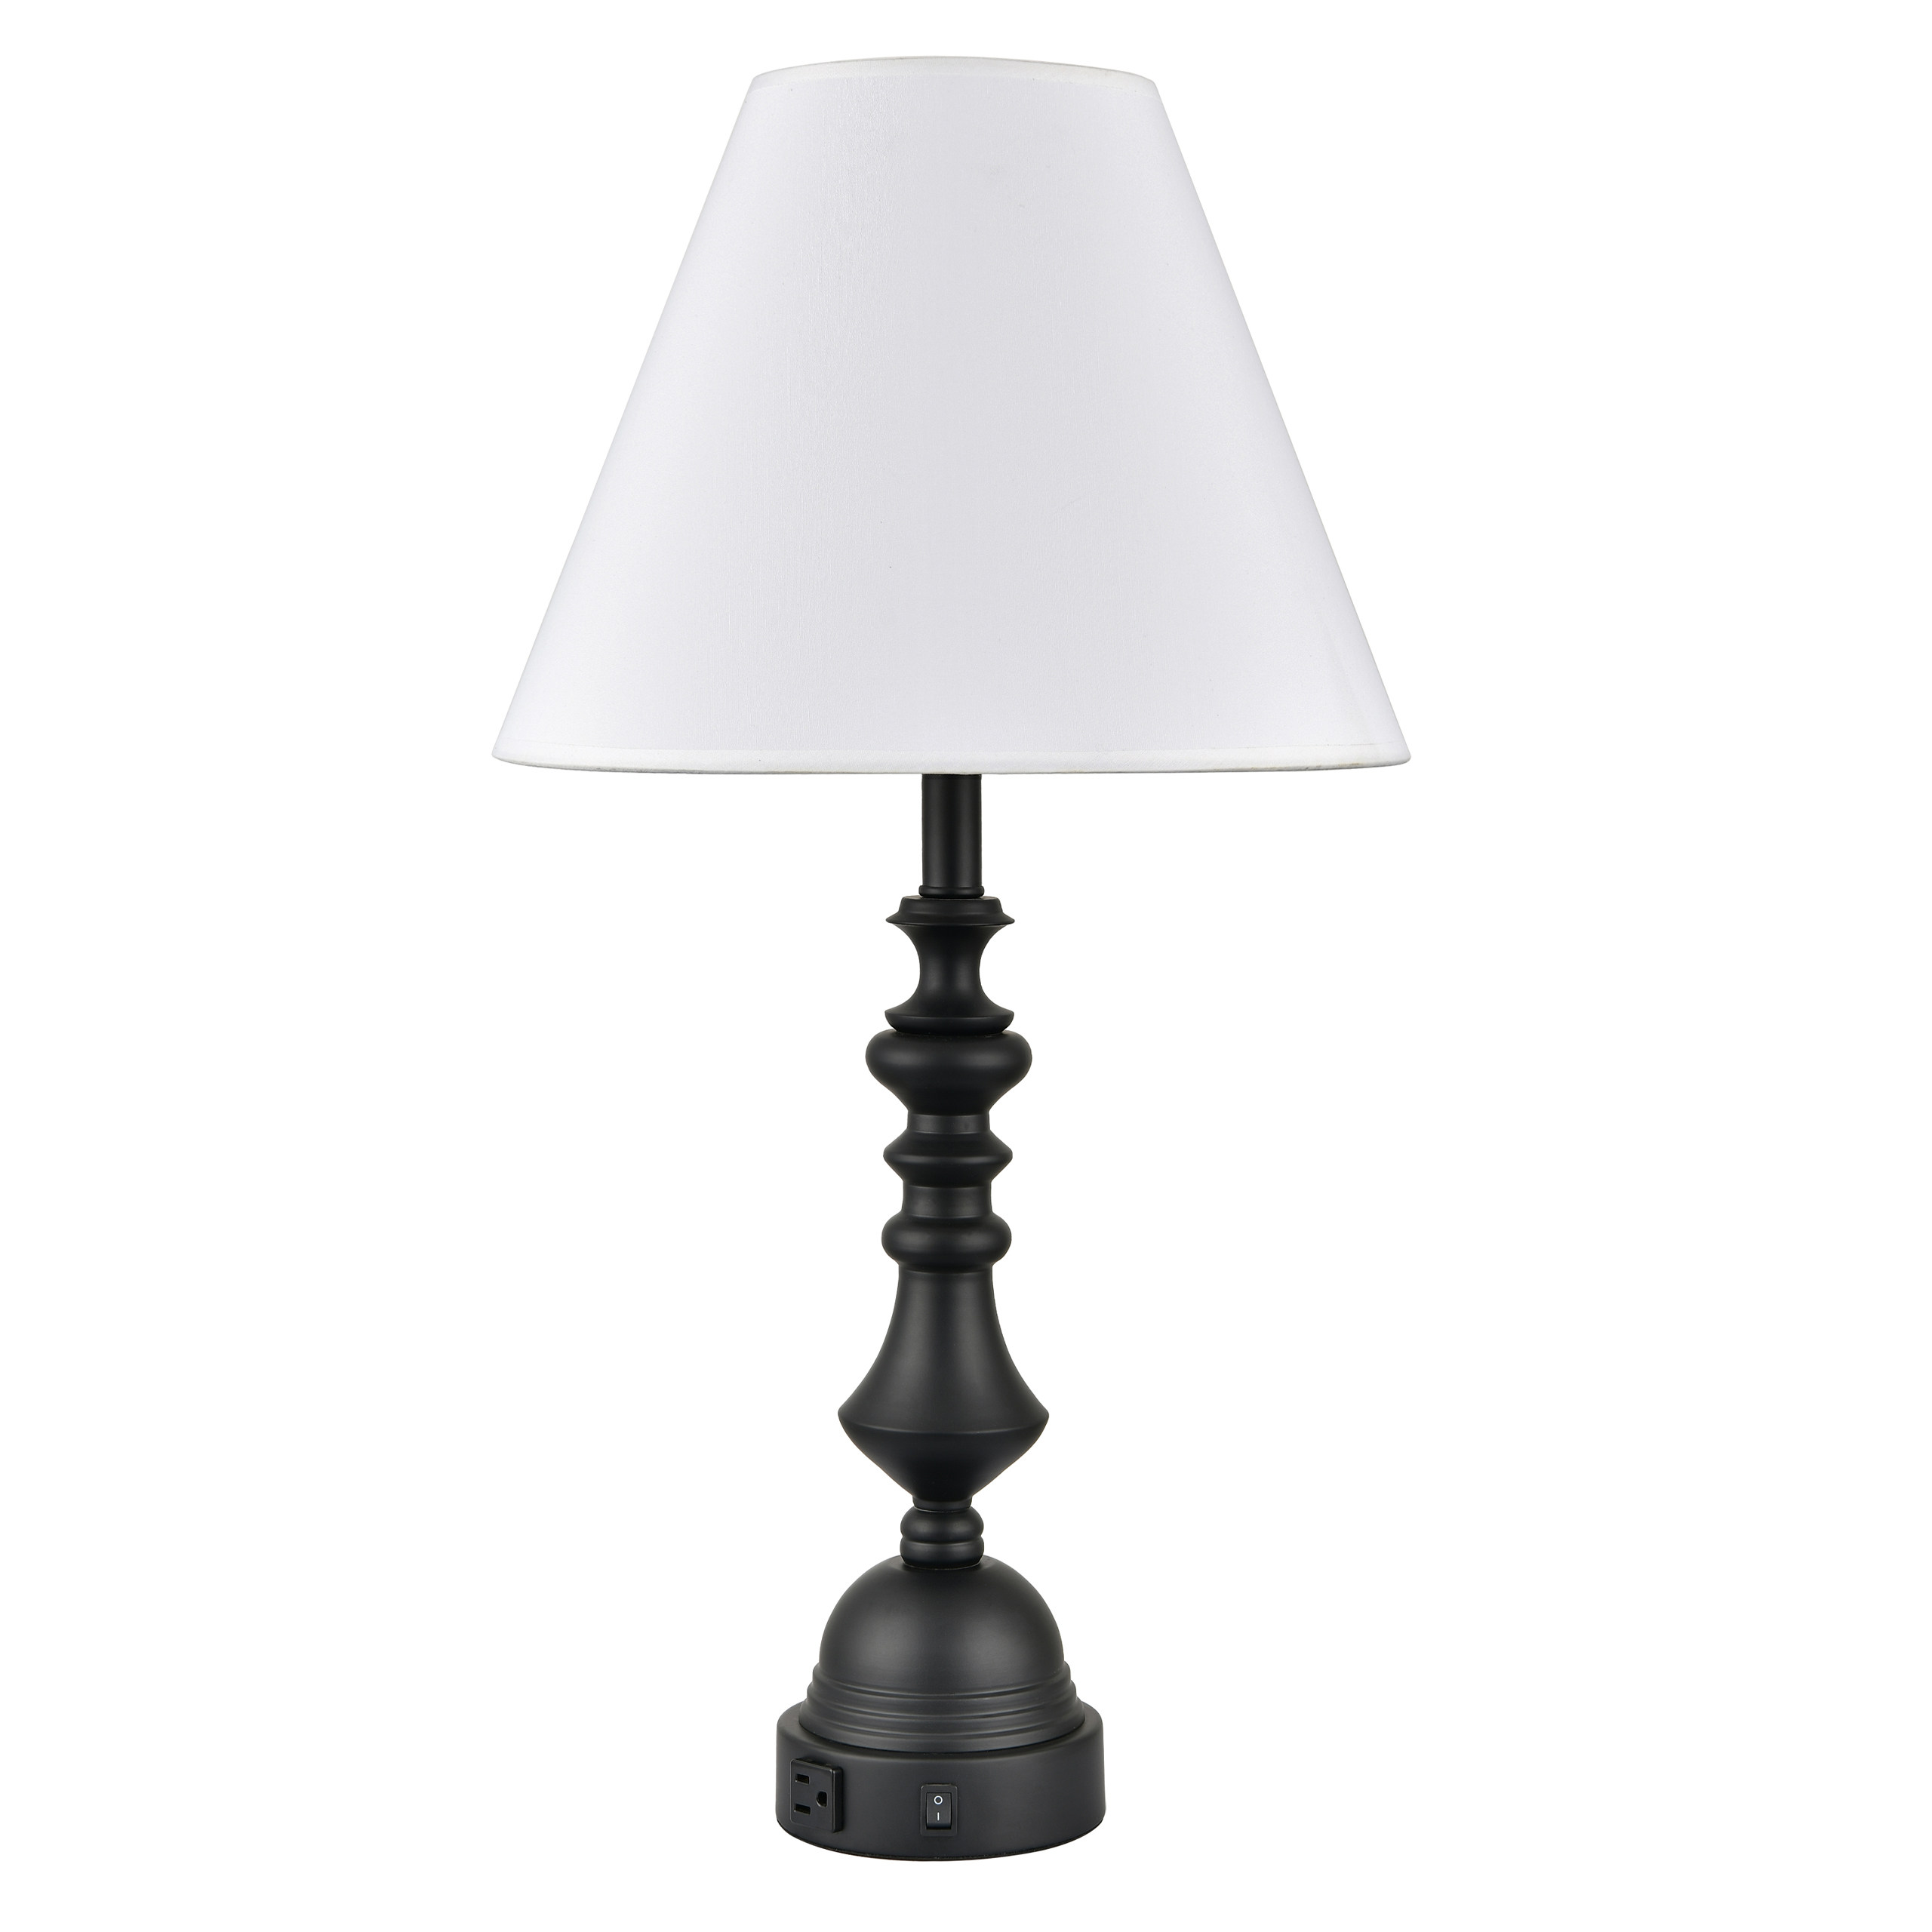 https://www.hotel-lamps.com/resources/assets/images/product_images/1658757609.CTH-017-BLK.jpg